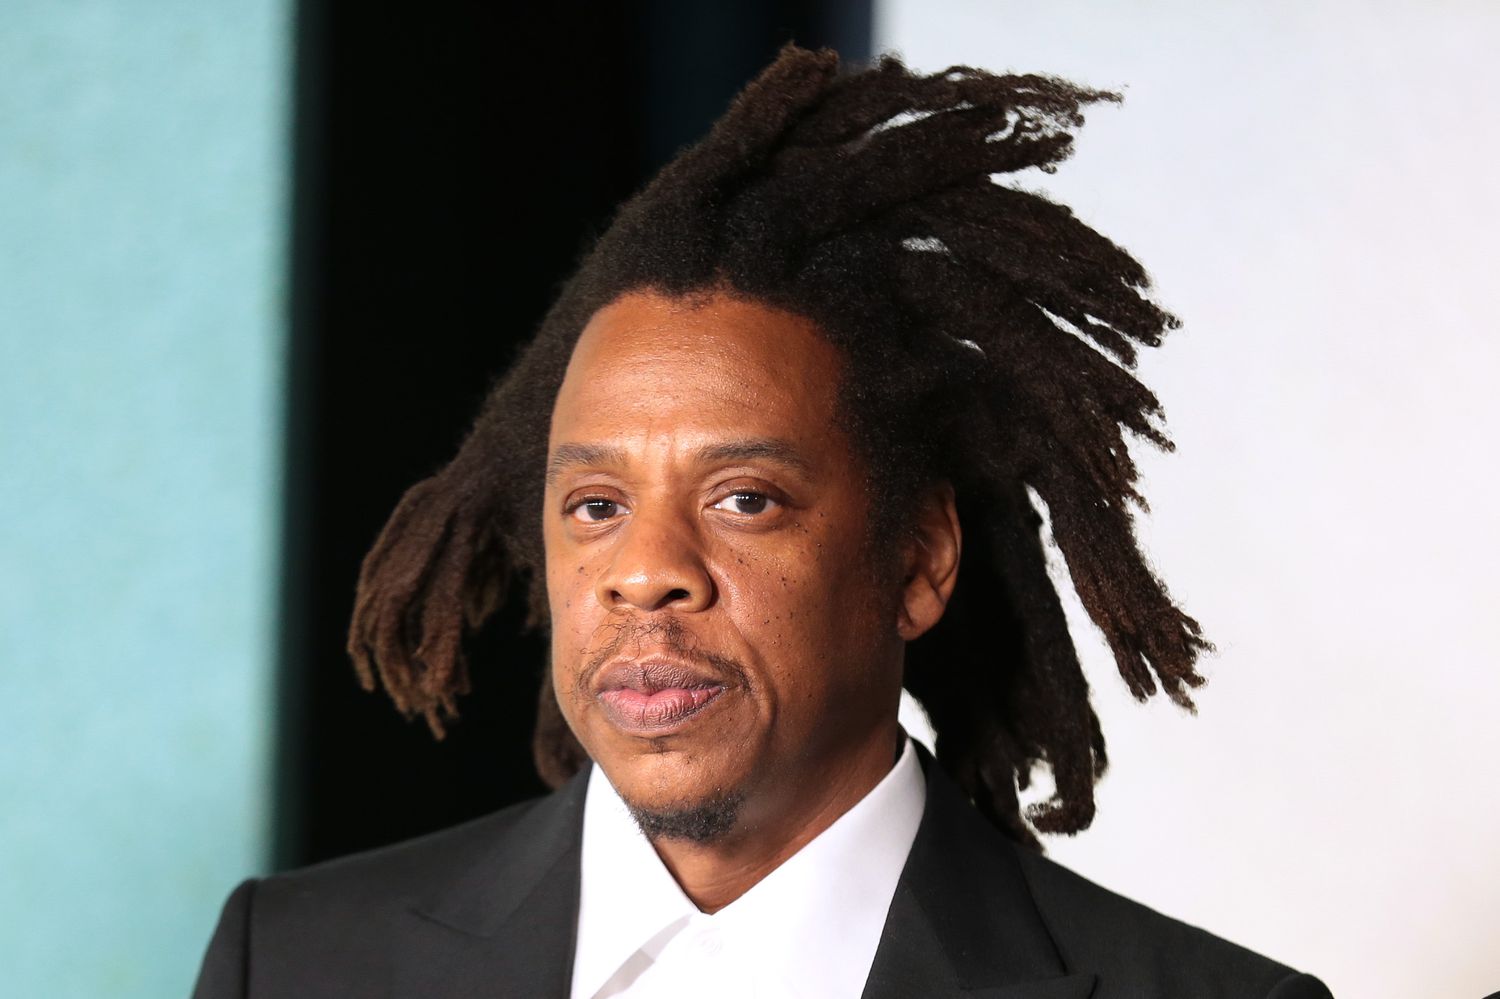 The Surprising Reason Why Jay Z's Attractiveness Sparks Heated Debates